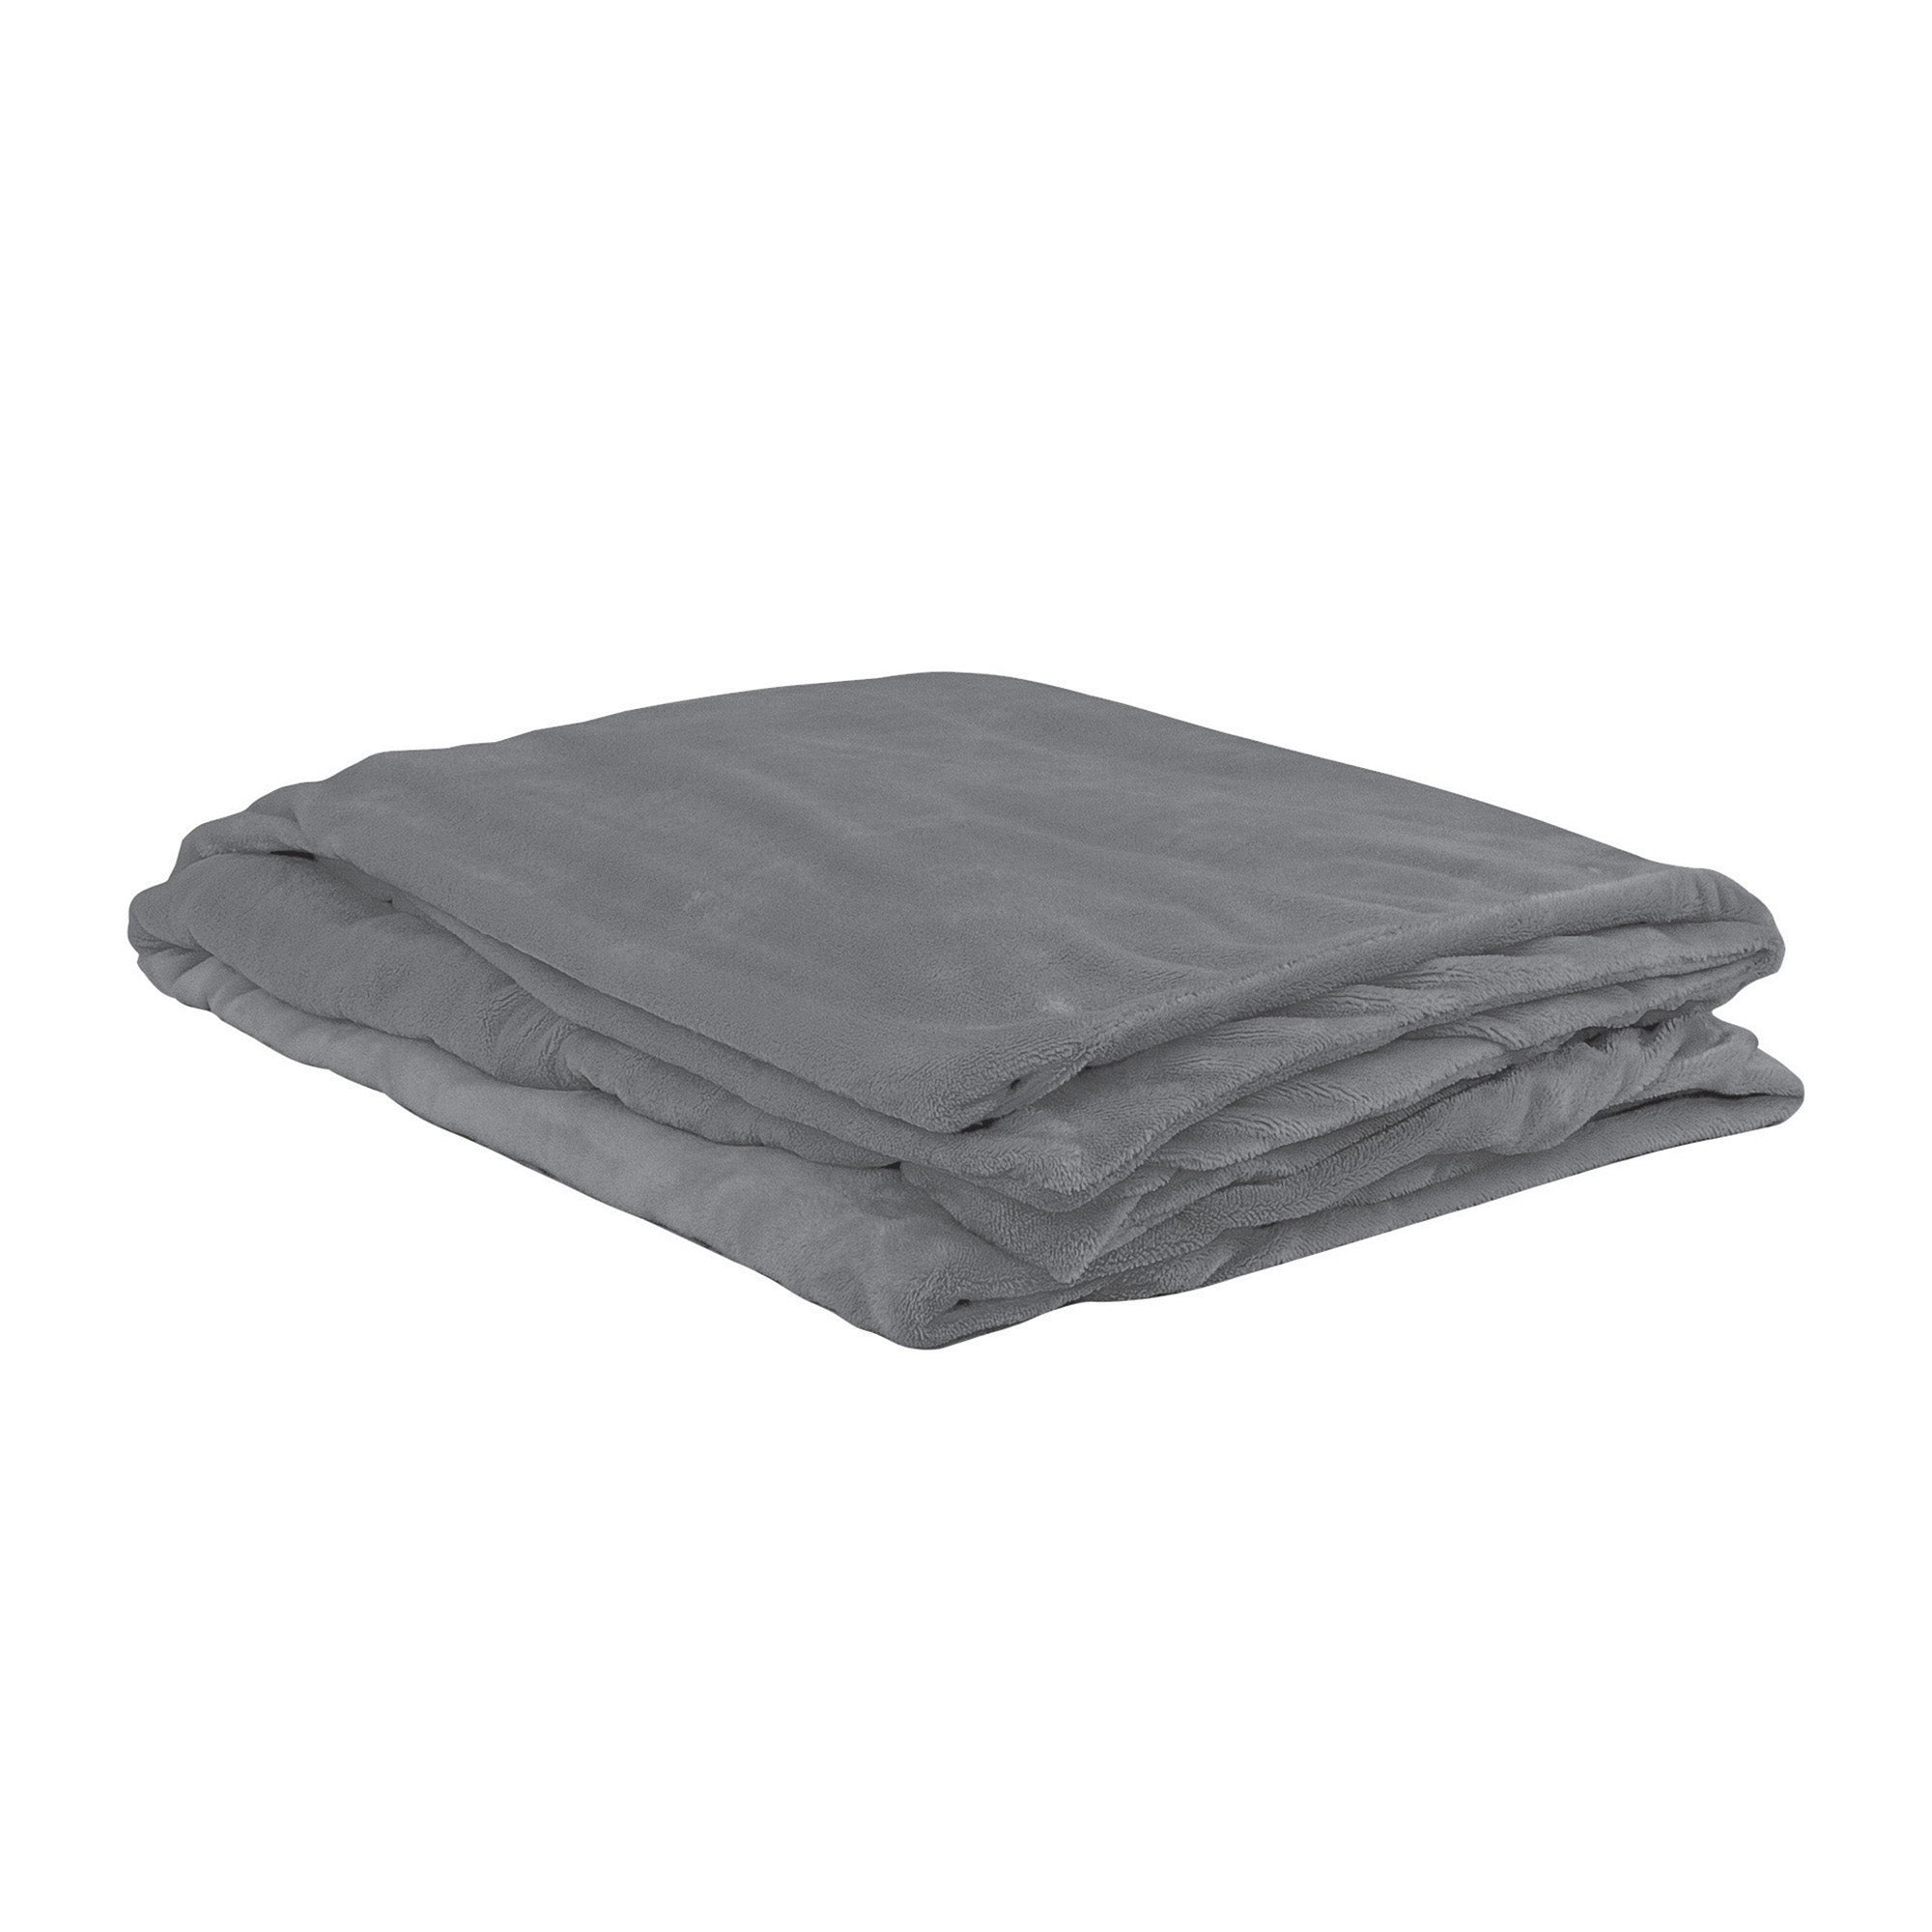 ObusForme Grey 10lb Weighted Blanket - 15-08371